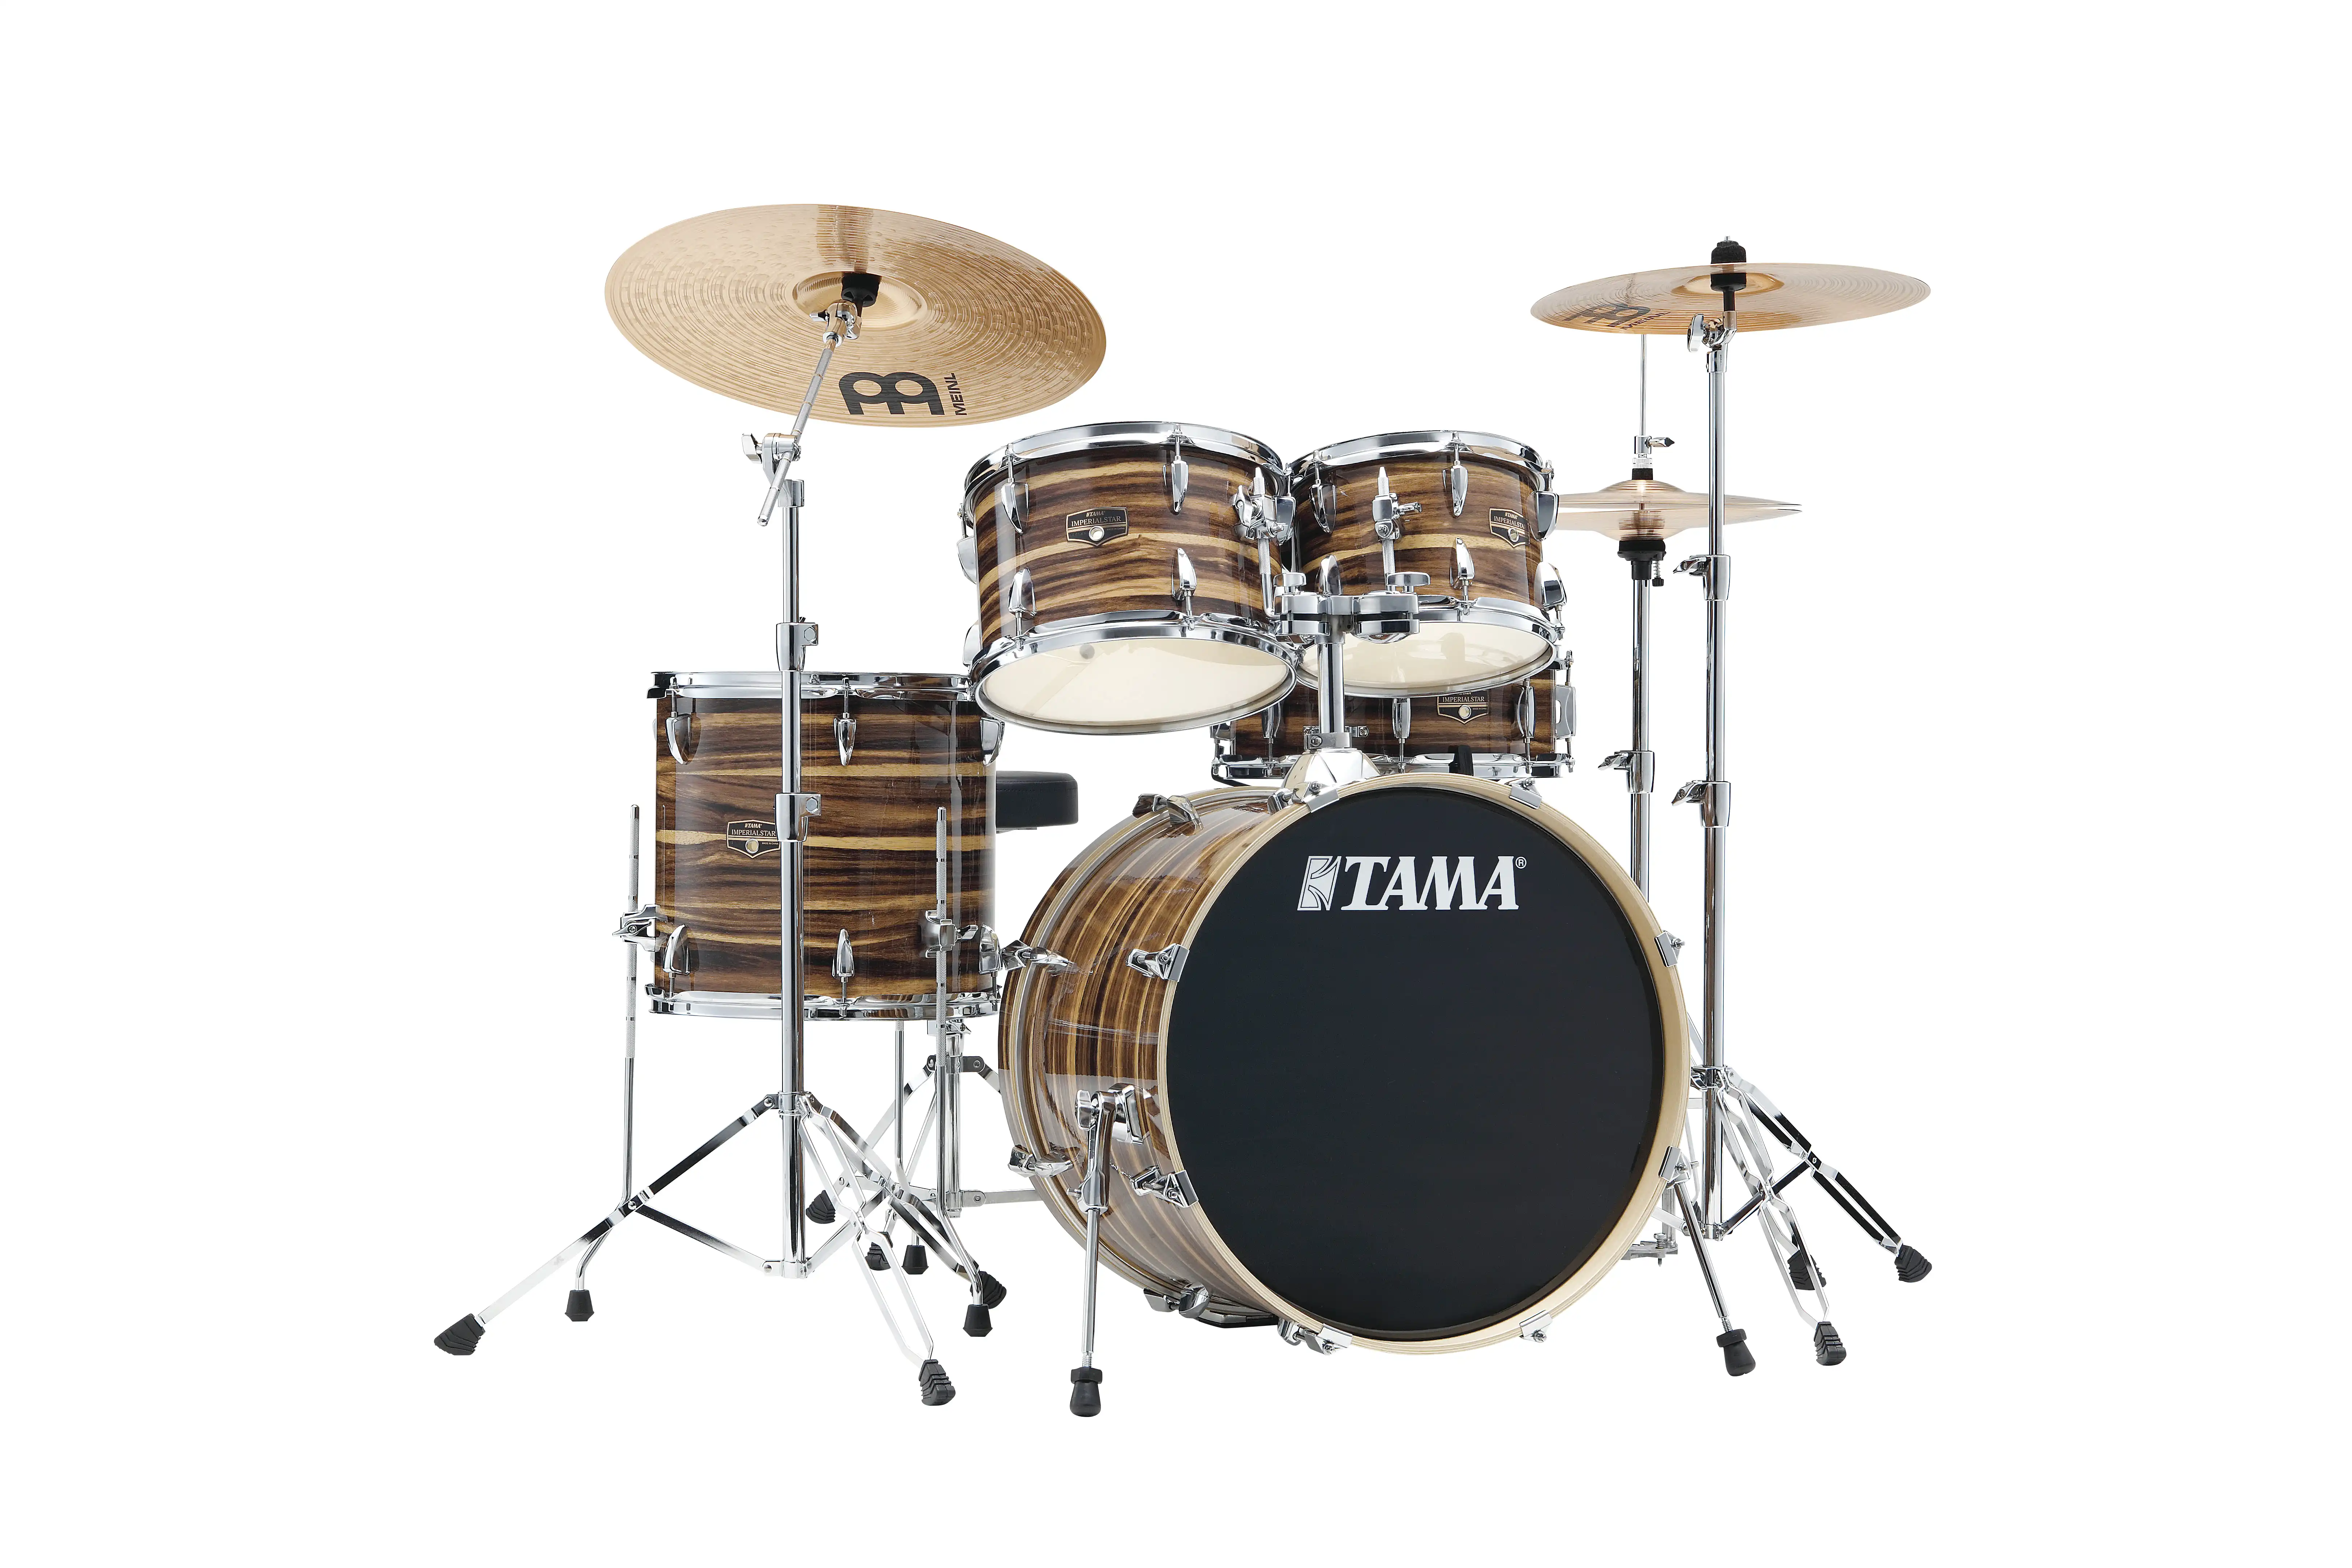 Tama IE50H6W-CTW Imperialstar Complete Set + HCSB Cymbal Set